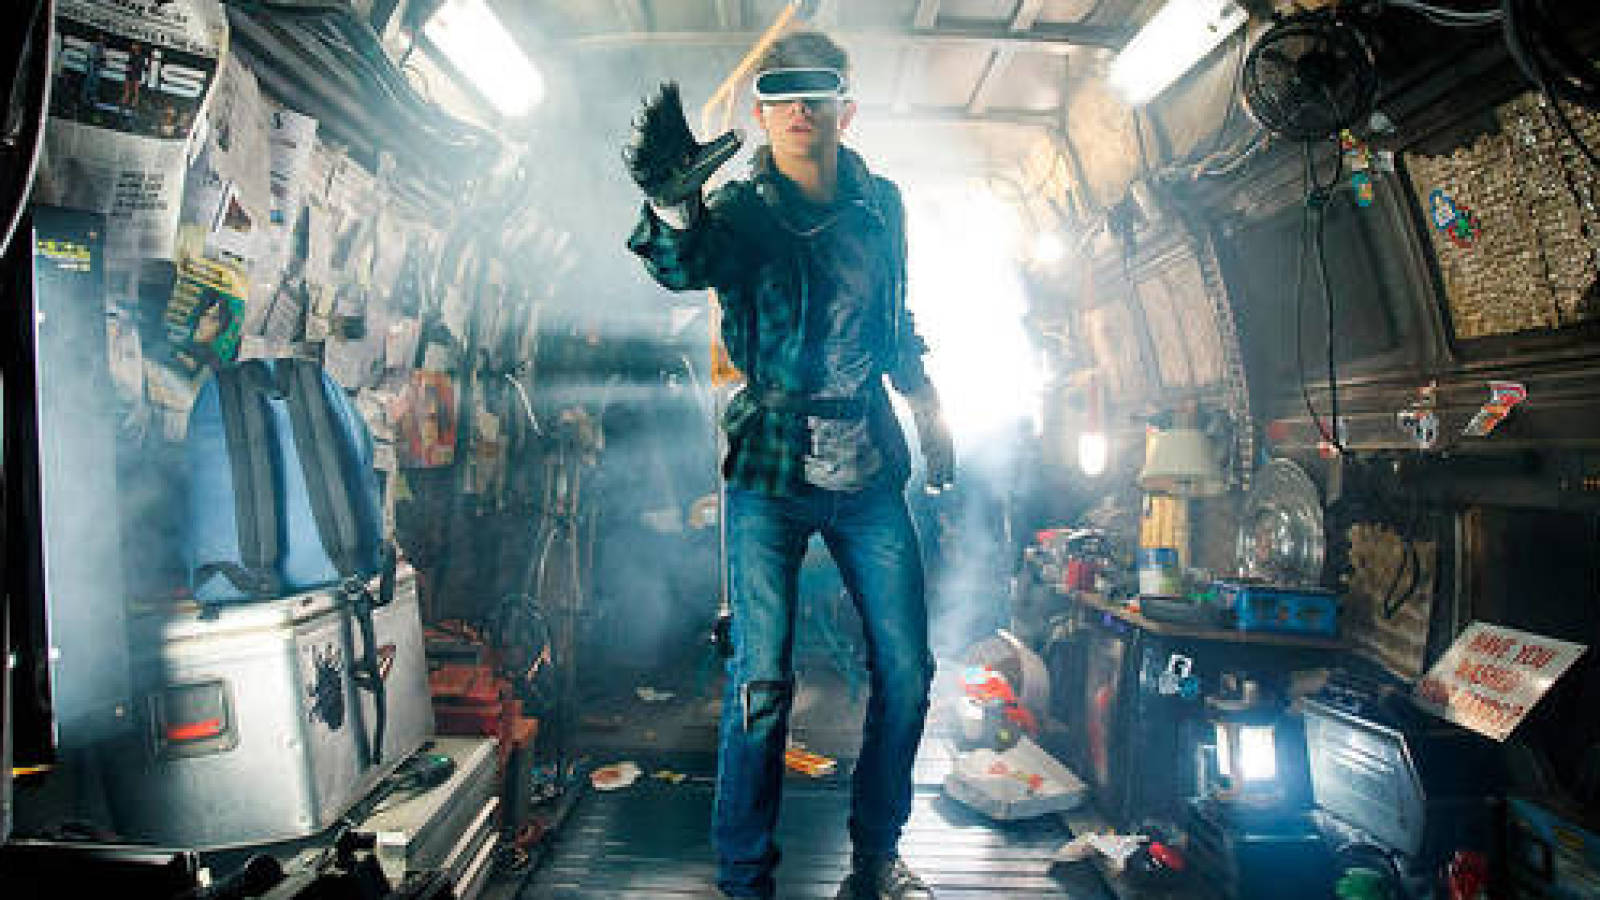 Retro references only true '80s kids will get in 'Ready Player One' |  Yardbarker